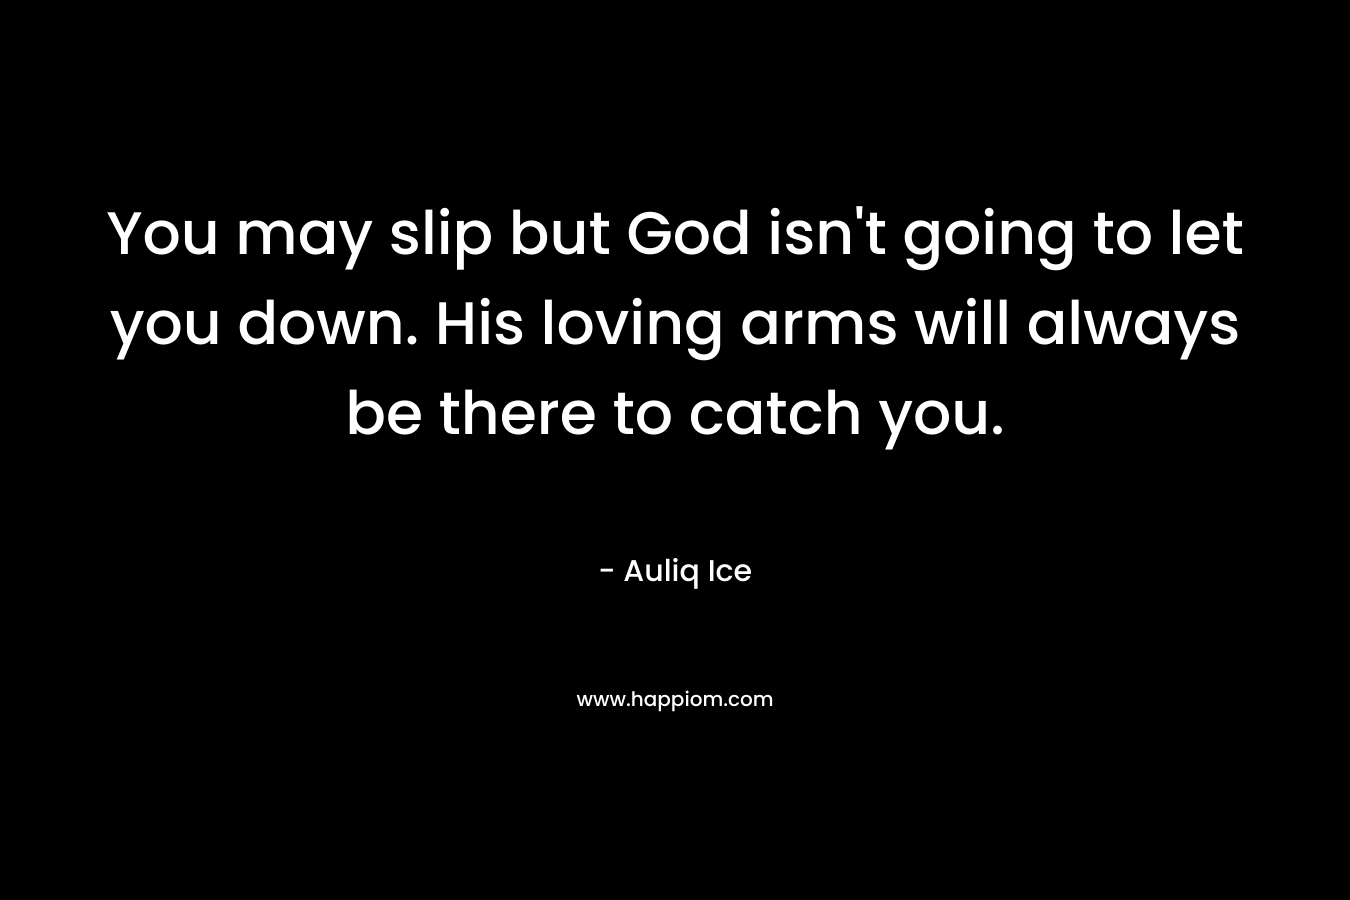 You may slip but God isn't going to let you down. His loving arms will always be there to catch you.